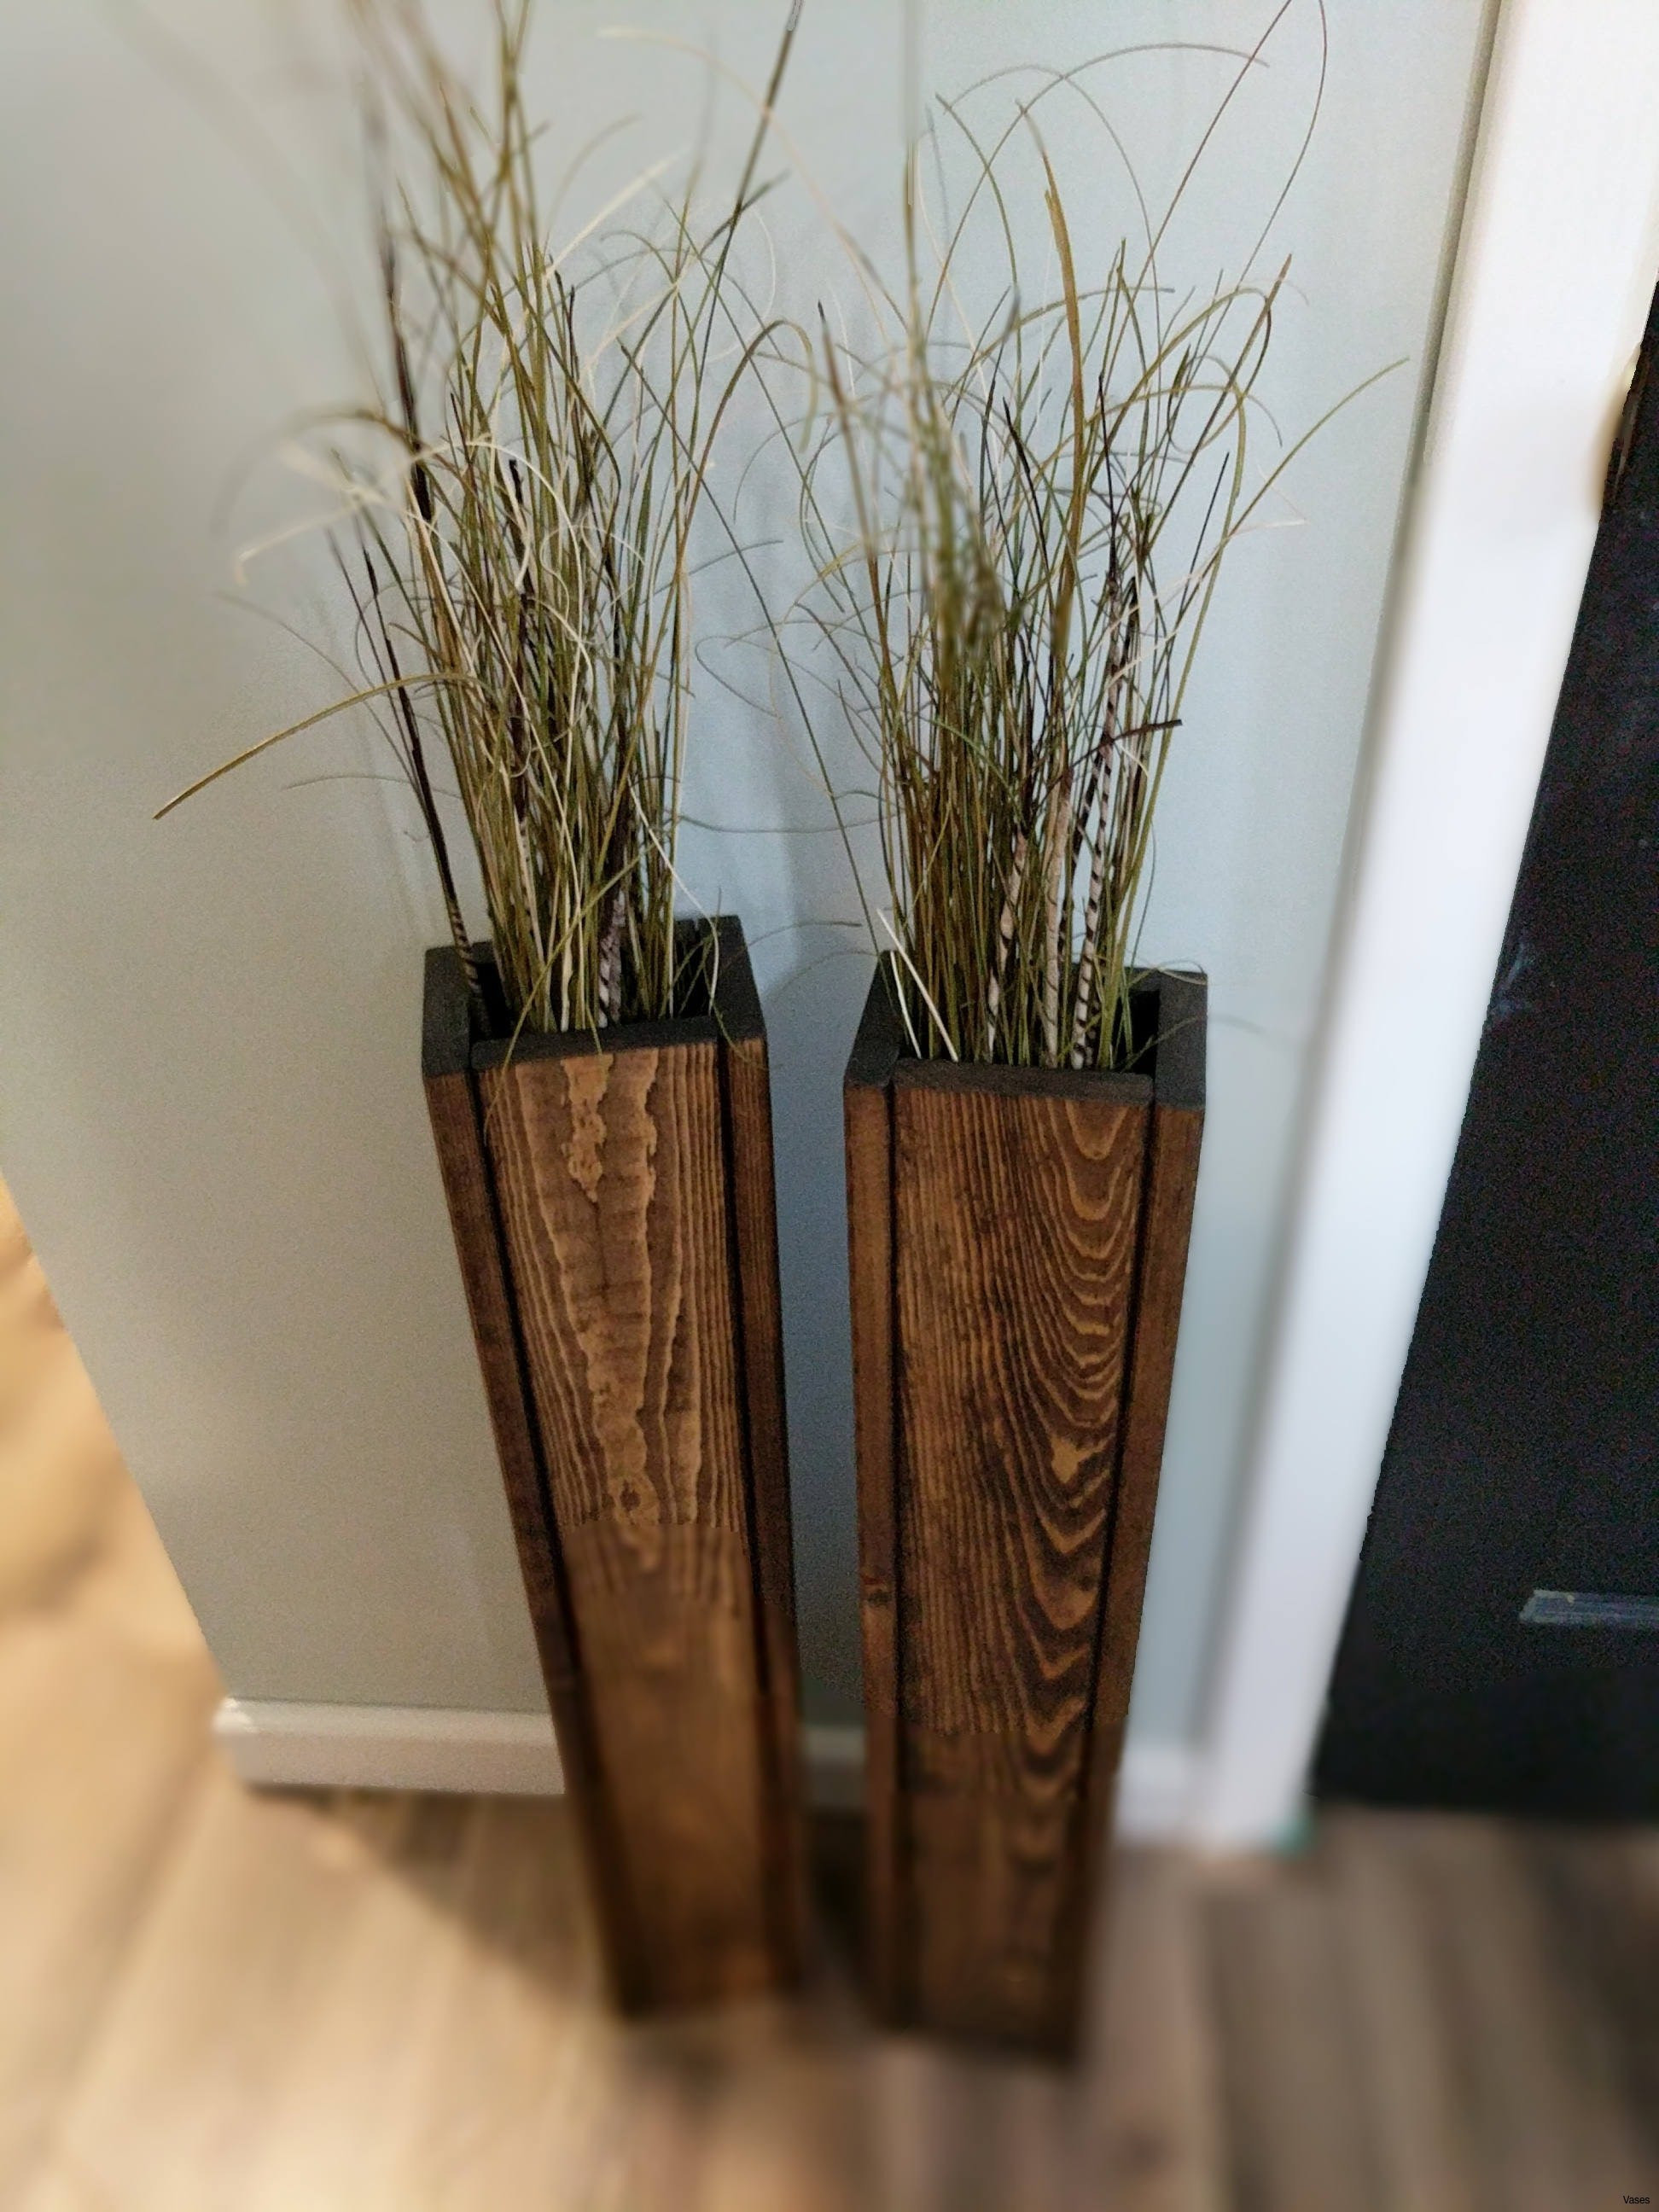 22 Great Brown Bamboo Vase 2024 free download brown bamboo vase of floor vases with bamboo sticks photograph bamboo sticks home decor in floor vases with bamboo sticks photograph bamboo sticks home decor lovely vases vase with twigs red